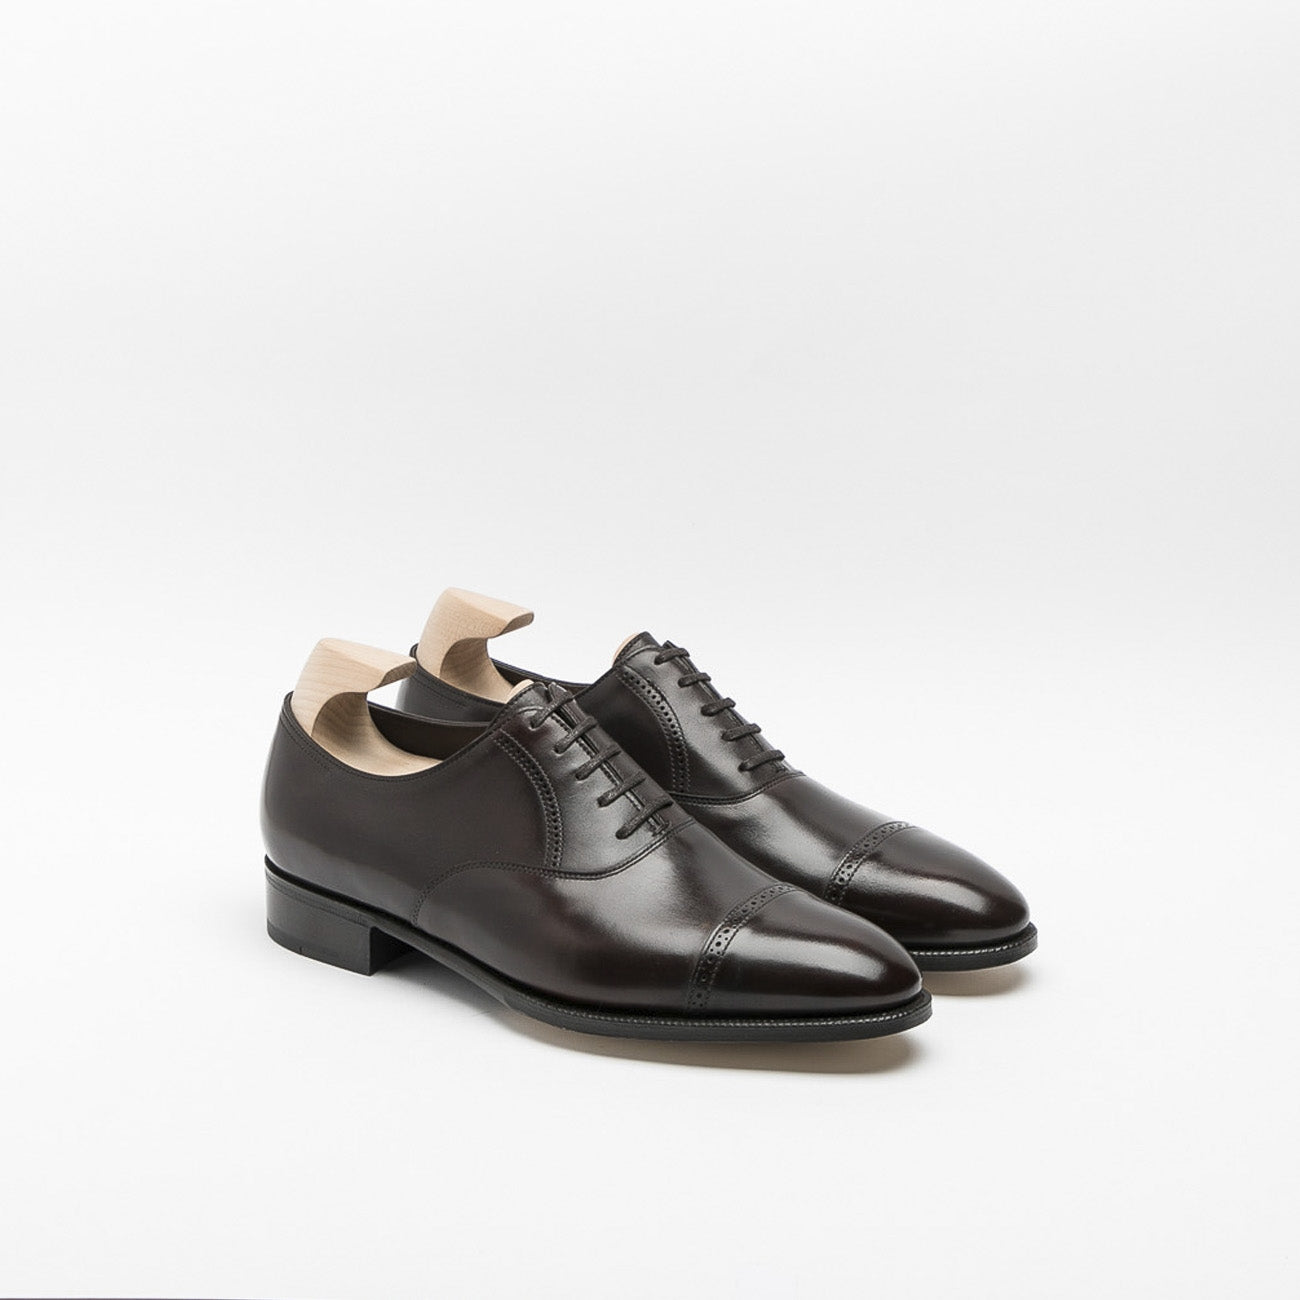 John Lobb Philip II oxford lace-up in brown leather